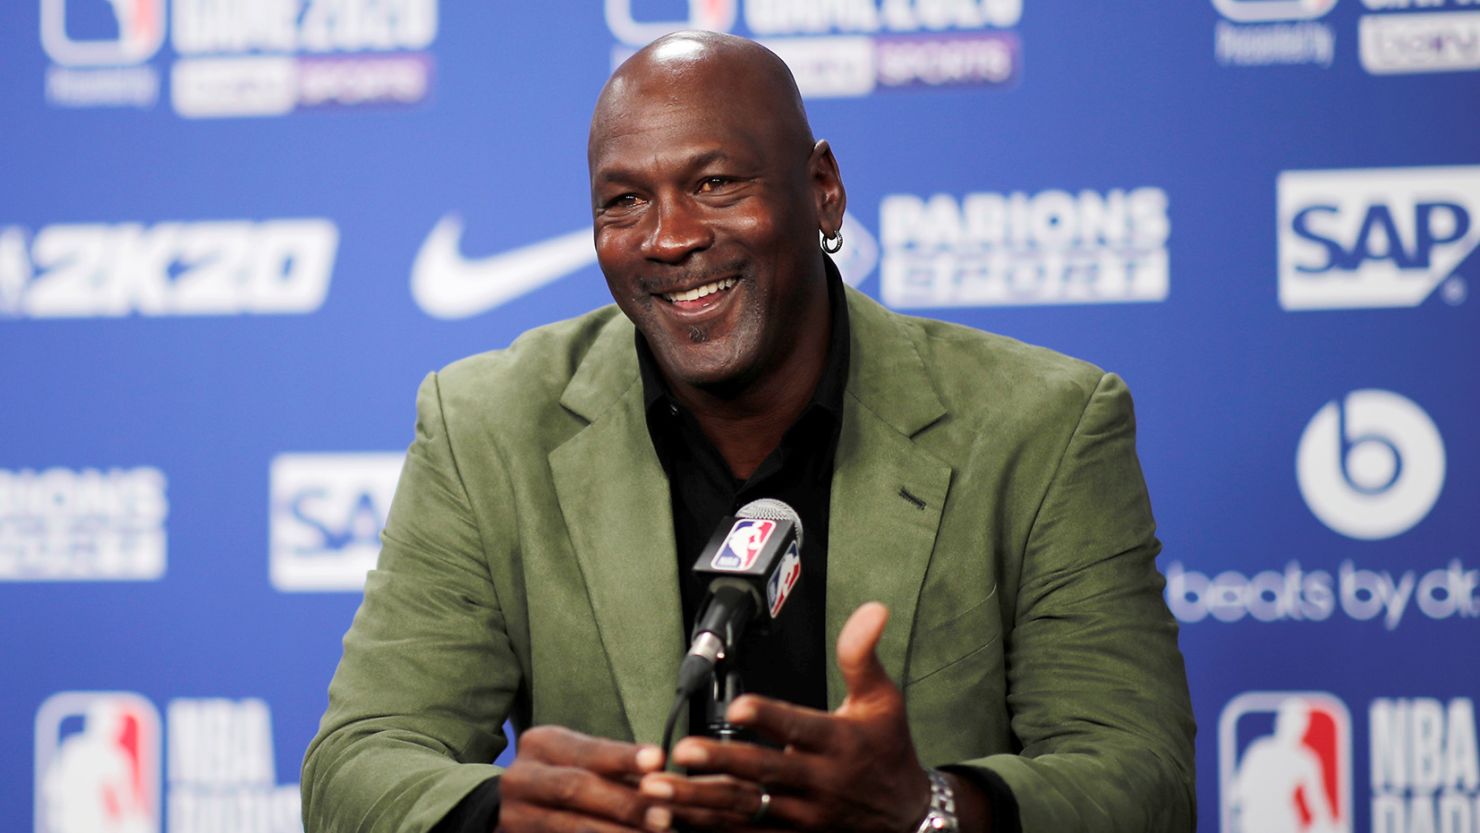 Michael Jordan becomes first athlete to rank among America's 400 wealthiest people, according to Forbes | CNN